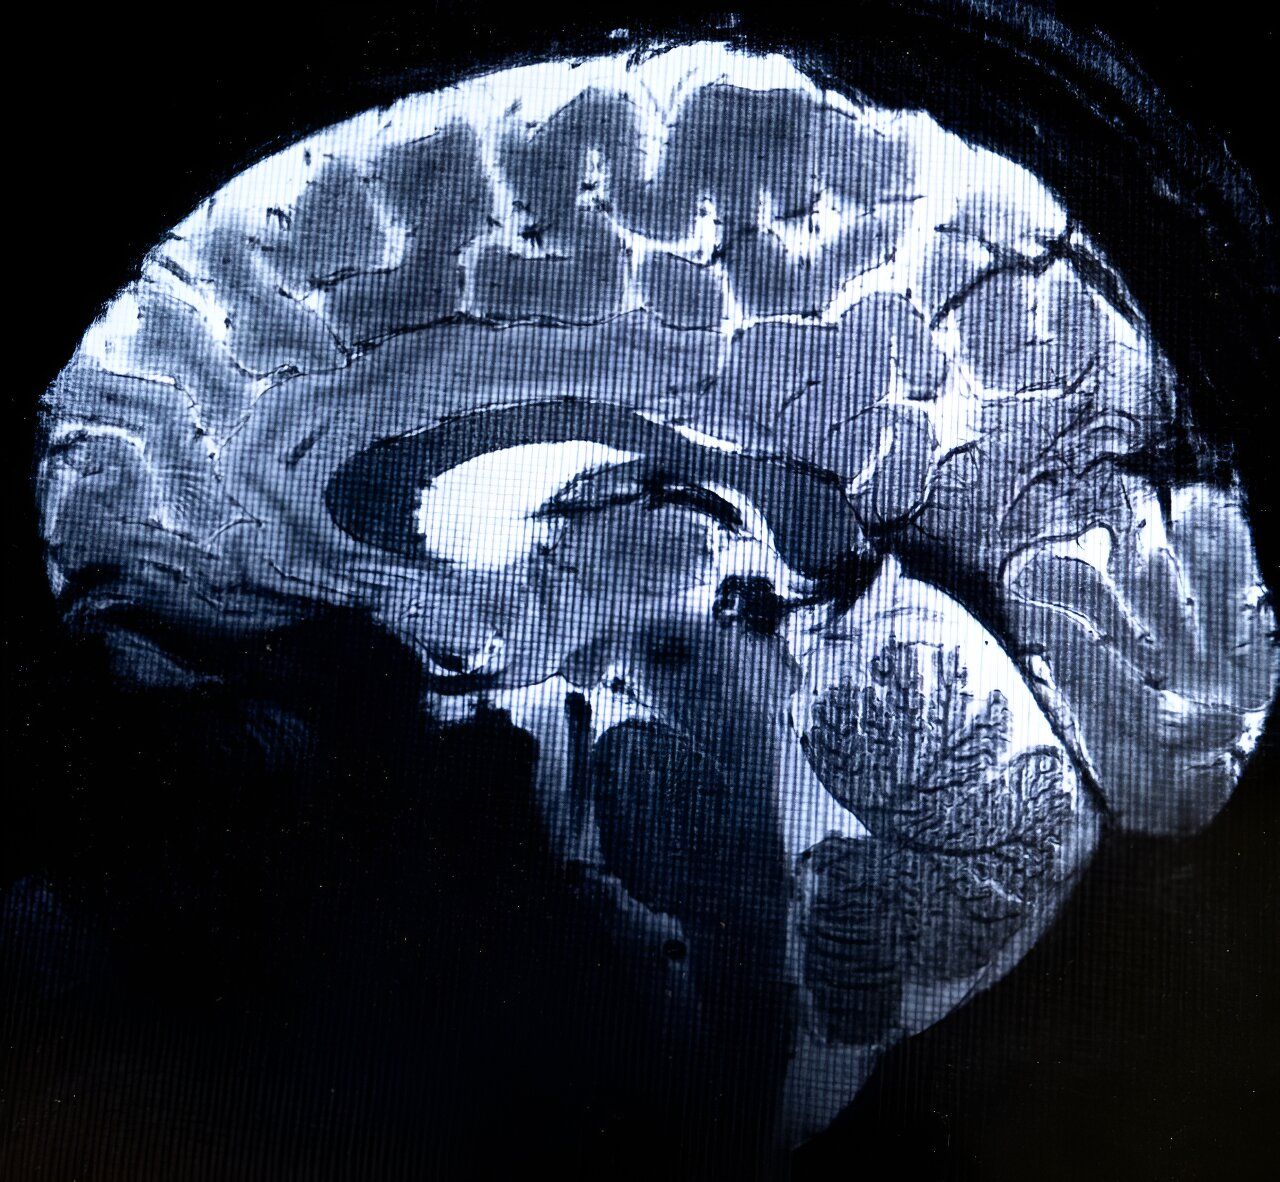 What is Iseult? The world's most powerful MRI scans first images of the human brain